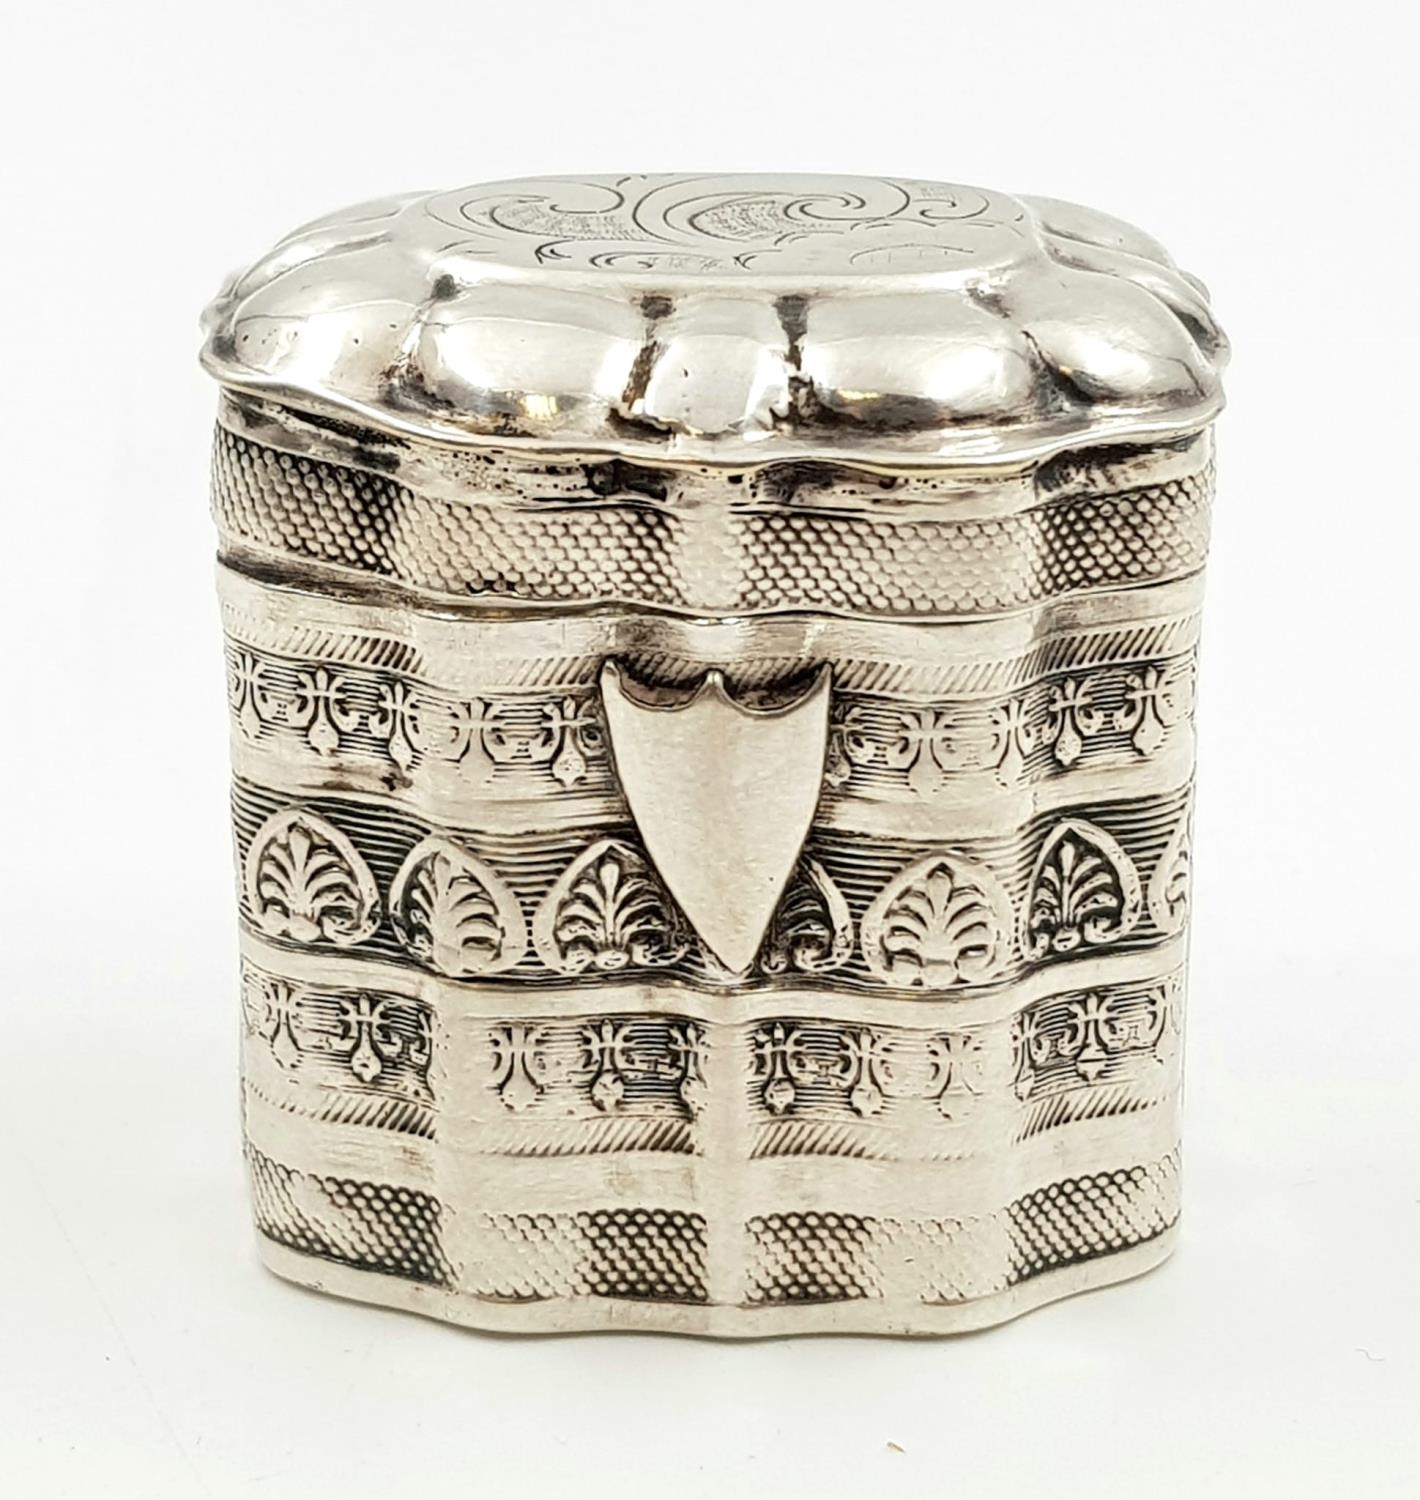 Antique (1870s) Silver Hallmarked Dutch Pill/Snuff Box. Beautifully engraved. 38mm tall. 20.5g.